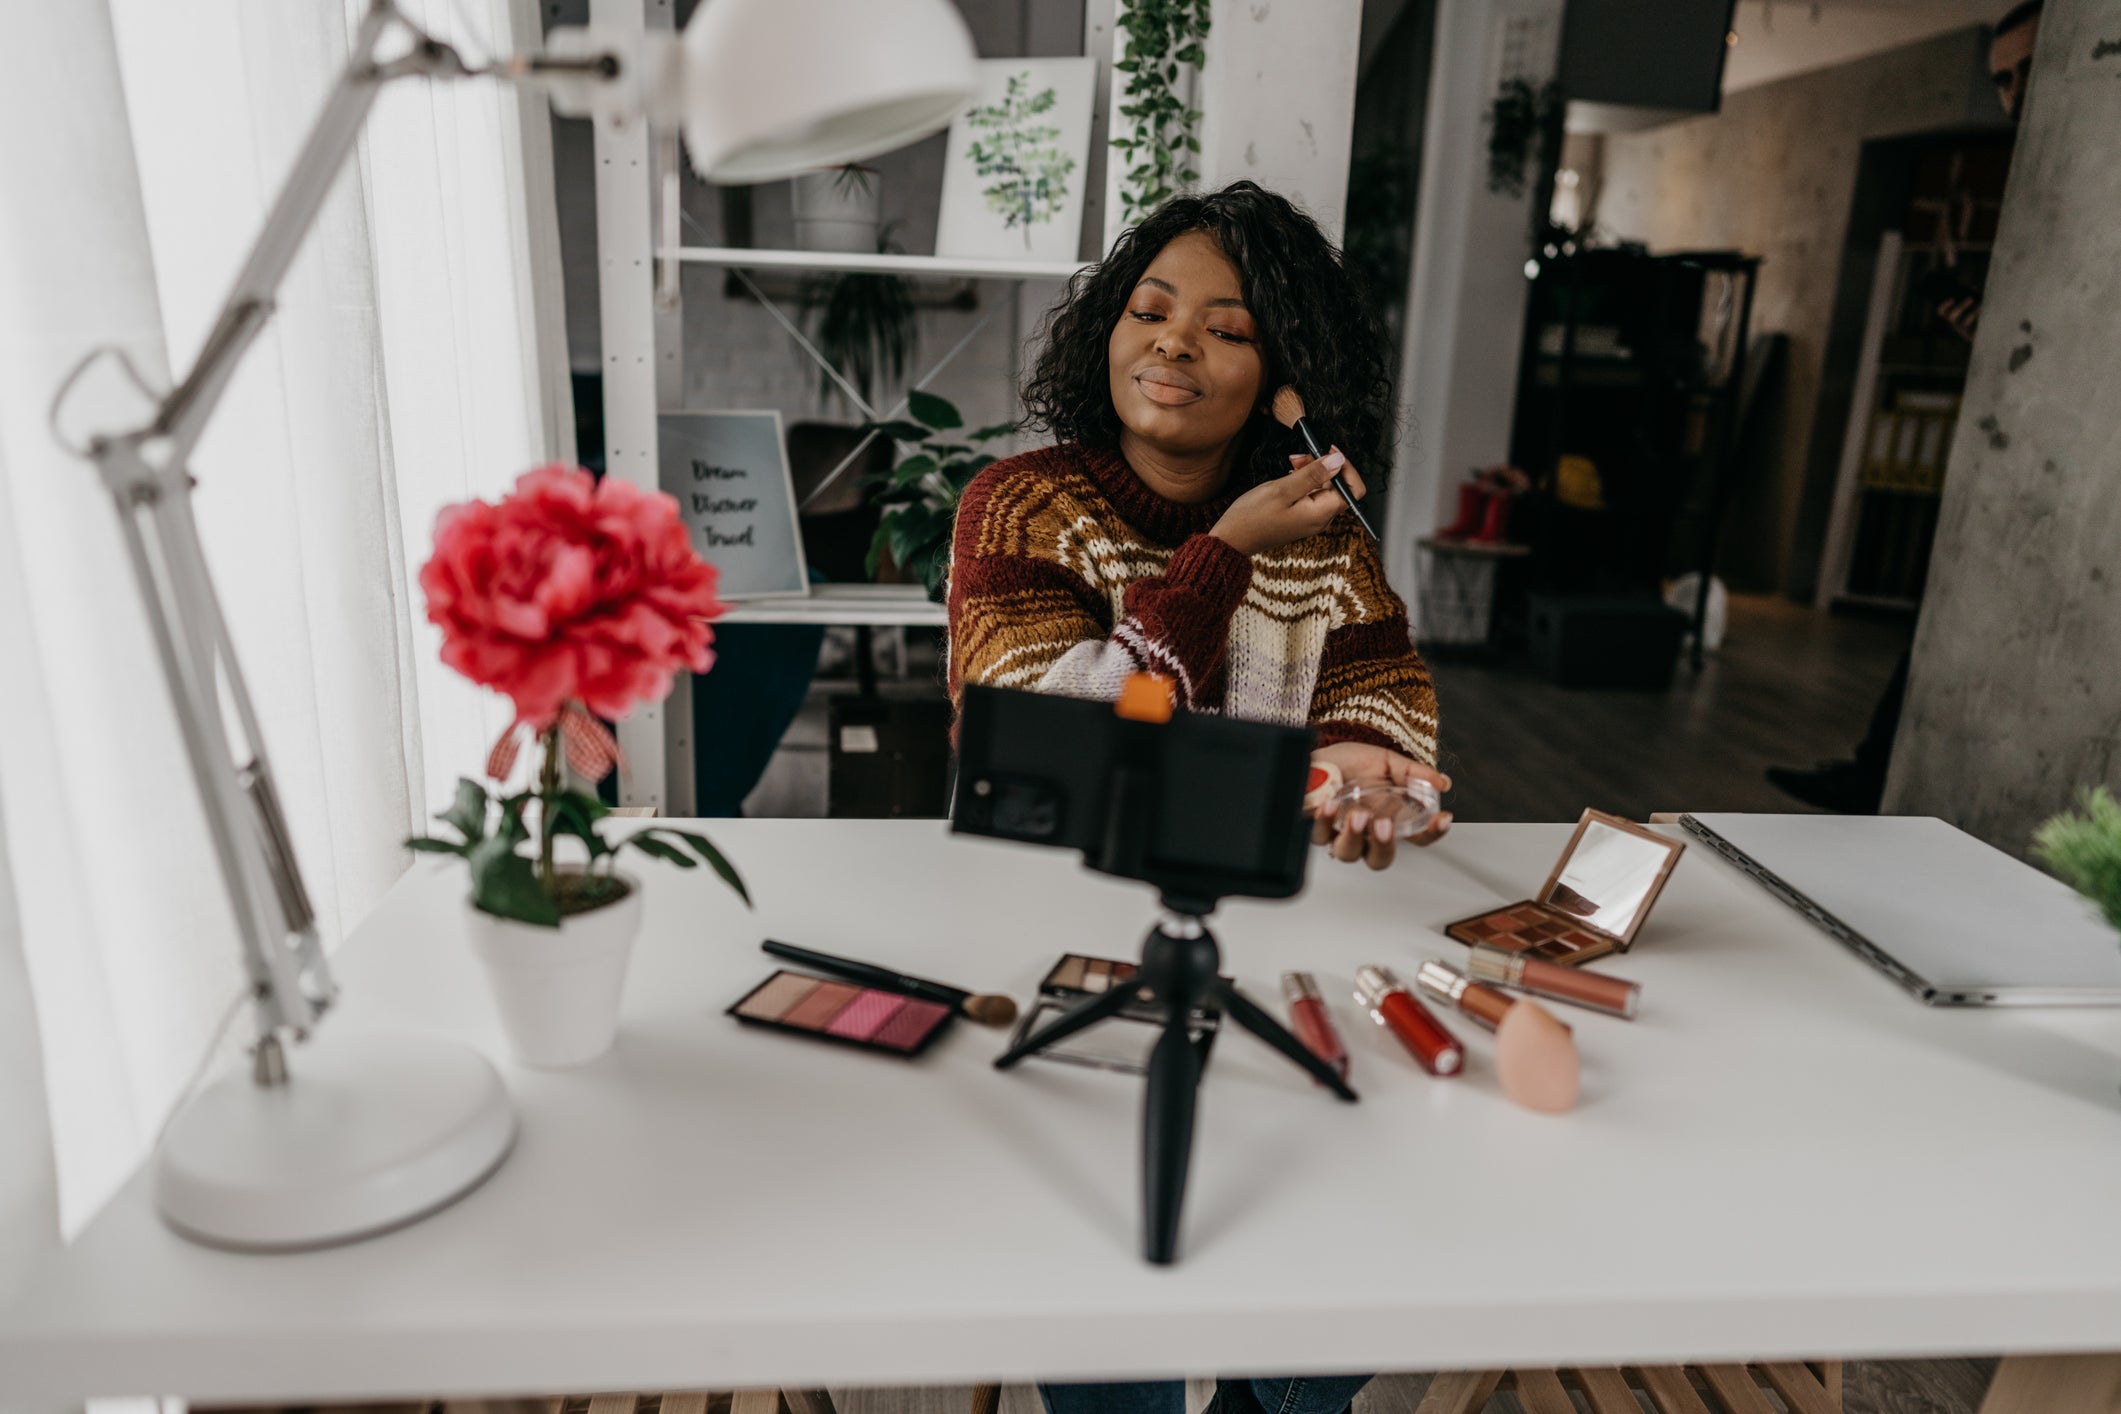 Data Shows More Consumers Across All Ethnicities Are Buying Beauty Products Created By Black Founders